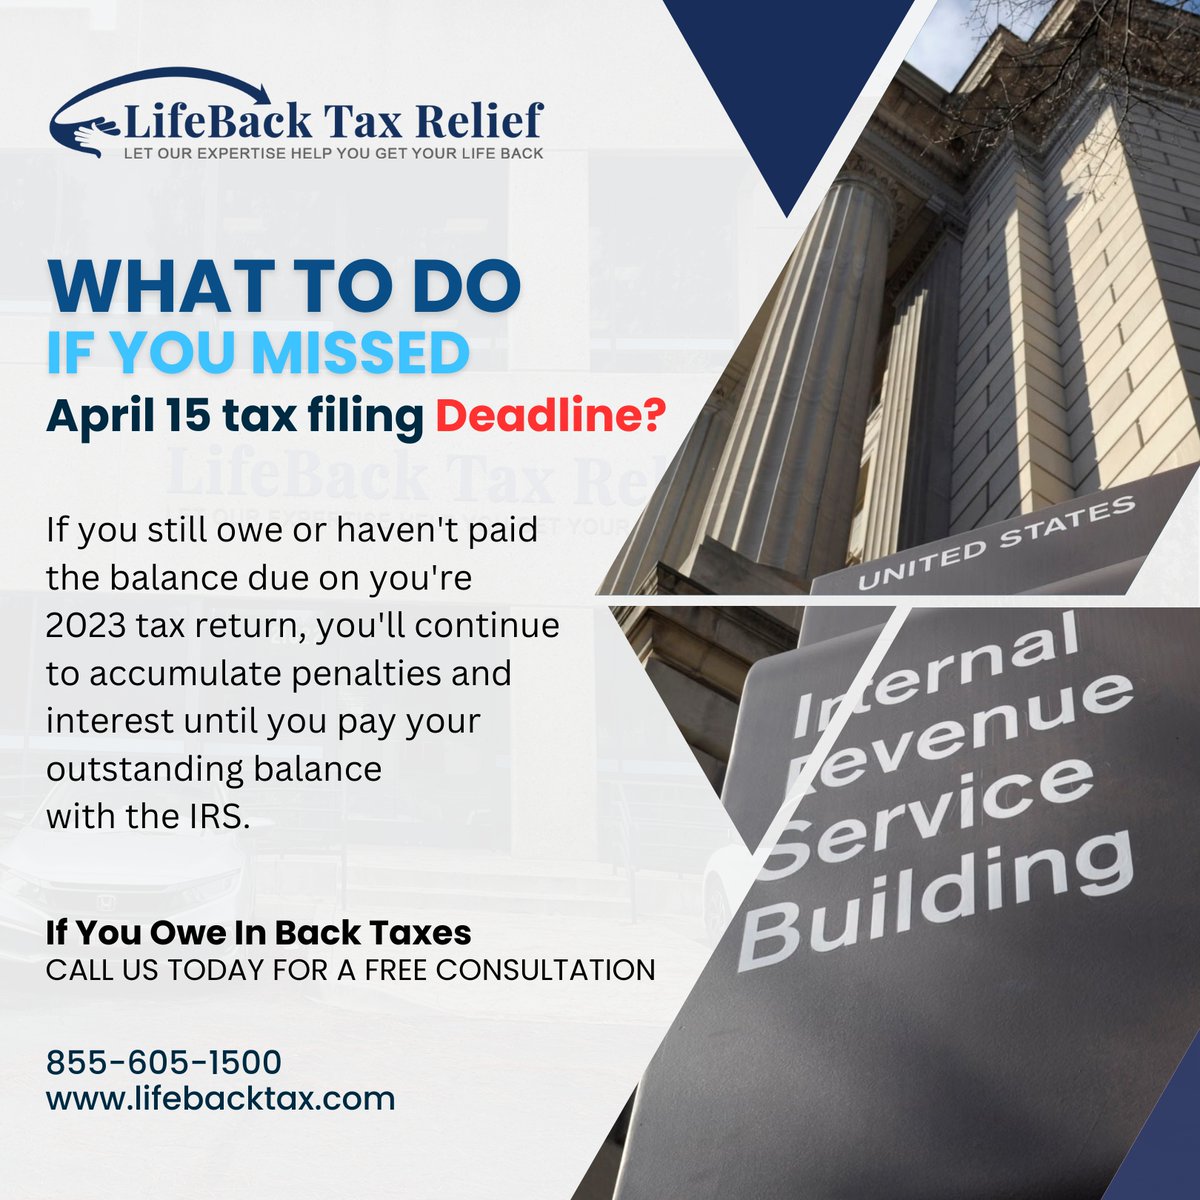 Missed the April 15 tax filing deadline? If you still owe or haven't paid your 2023 tax balance, it's crucial to take action to avoid penalties and interest piling up. Get our professional services for tax relief assistance today! 💼💰

 #taxdeadline #taxrelief #irshelp #irs